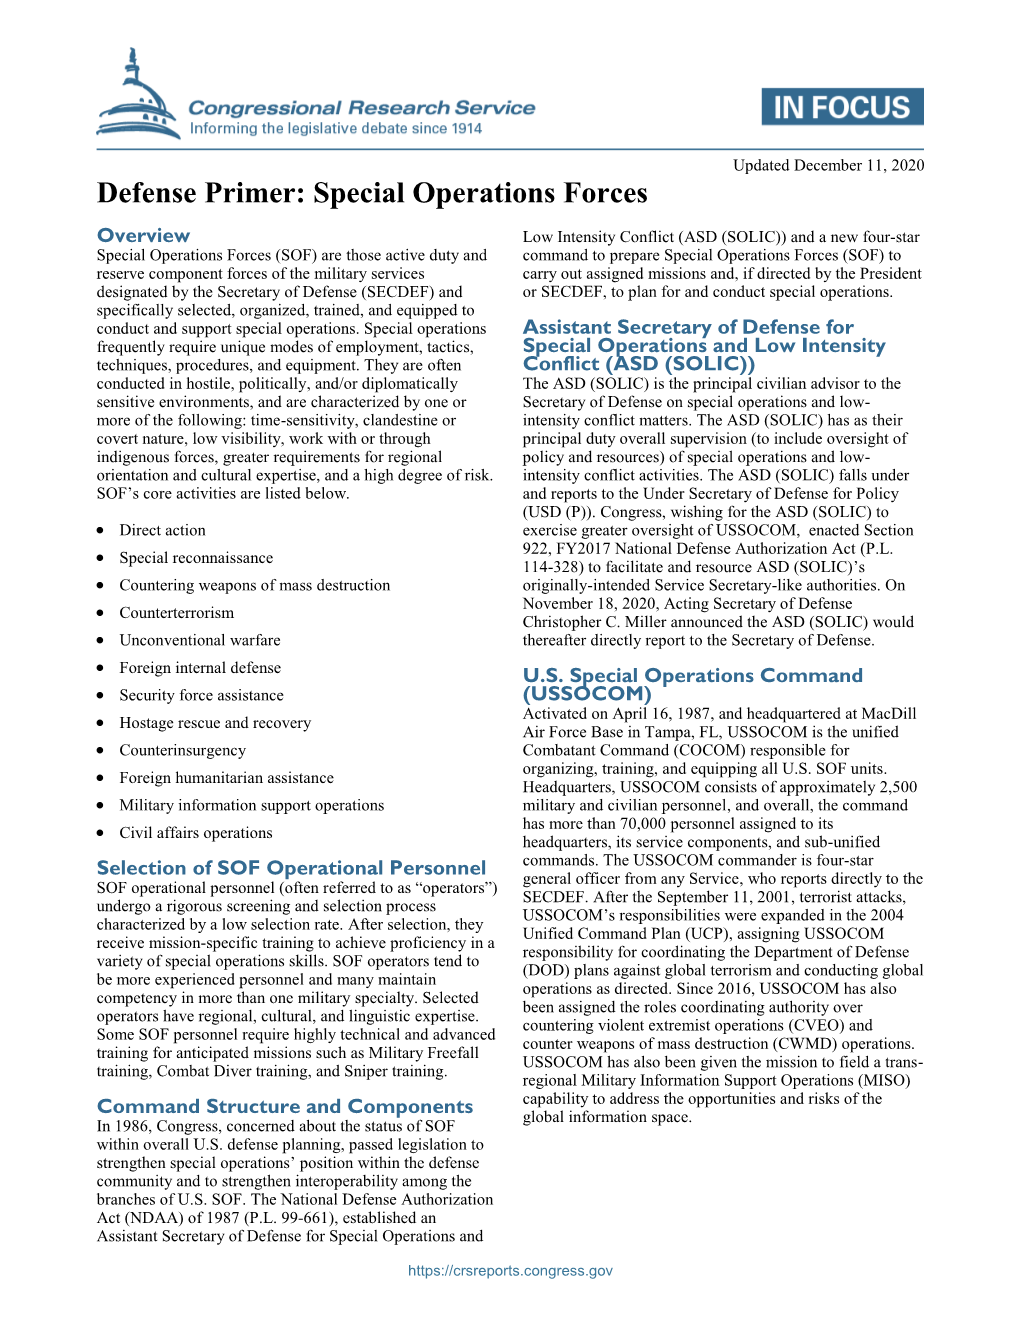 Defense Primer: Special Operations Forces